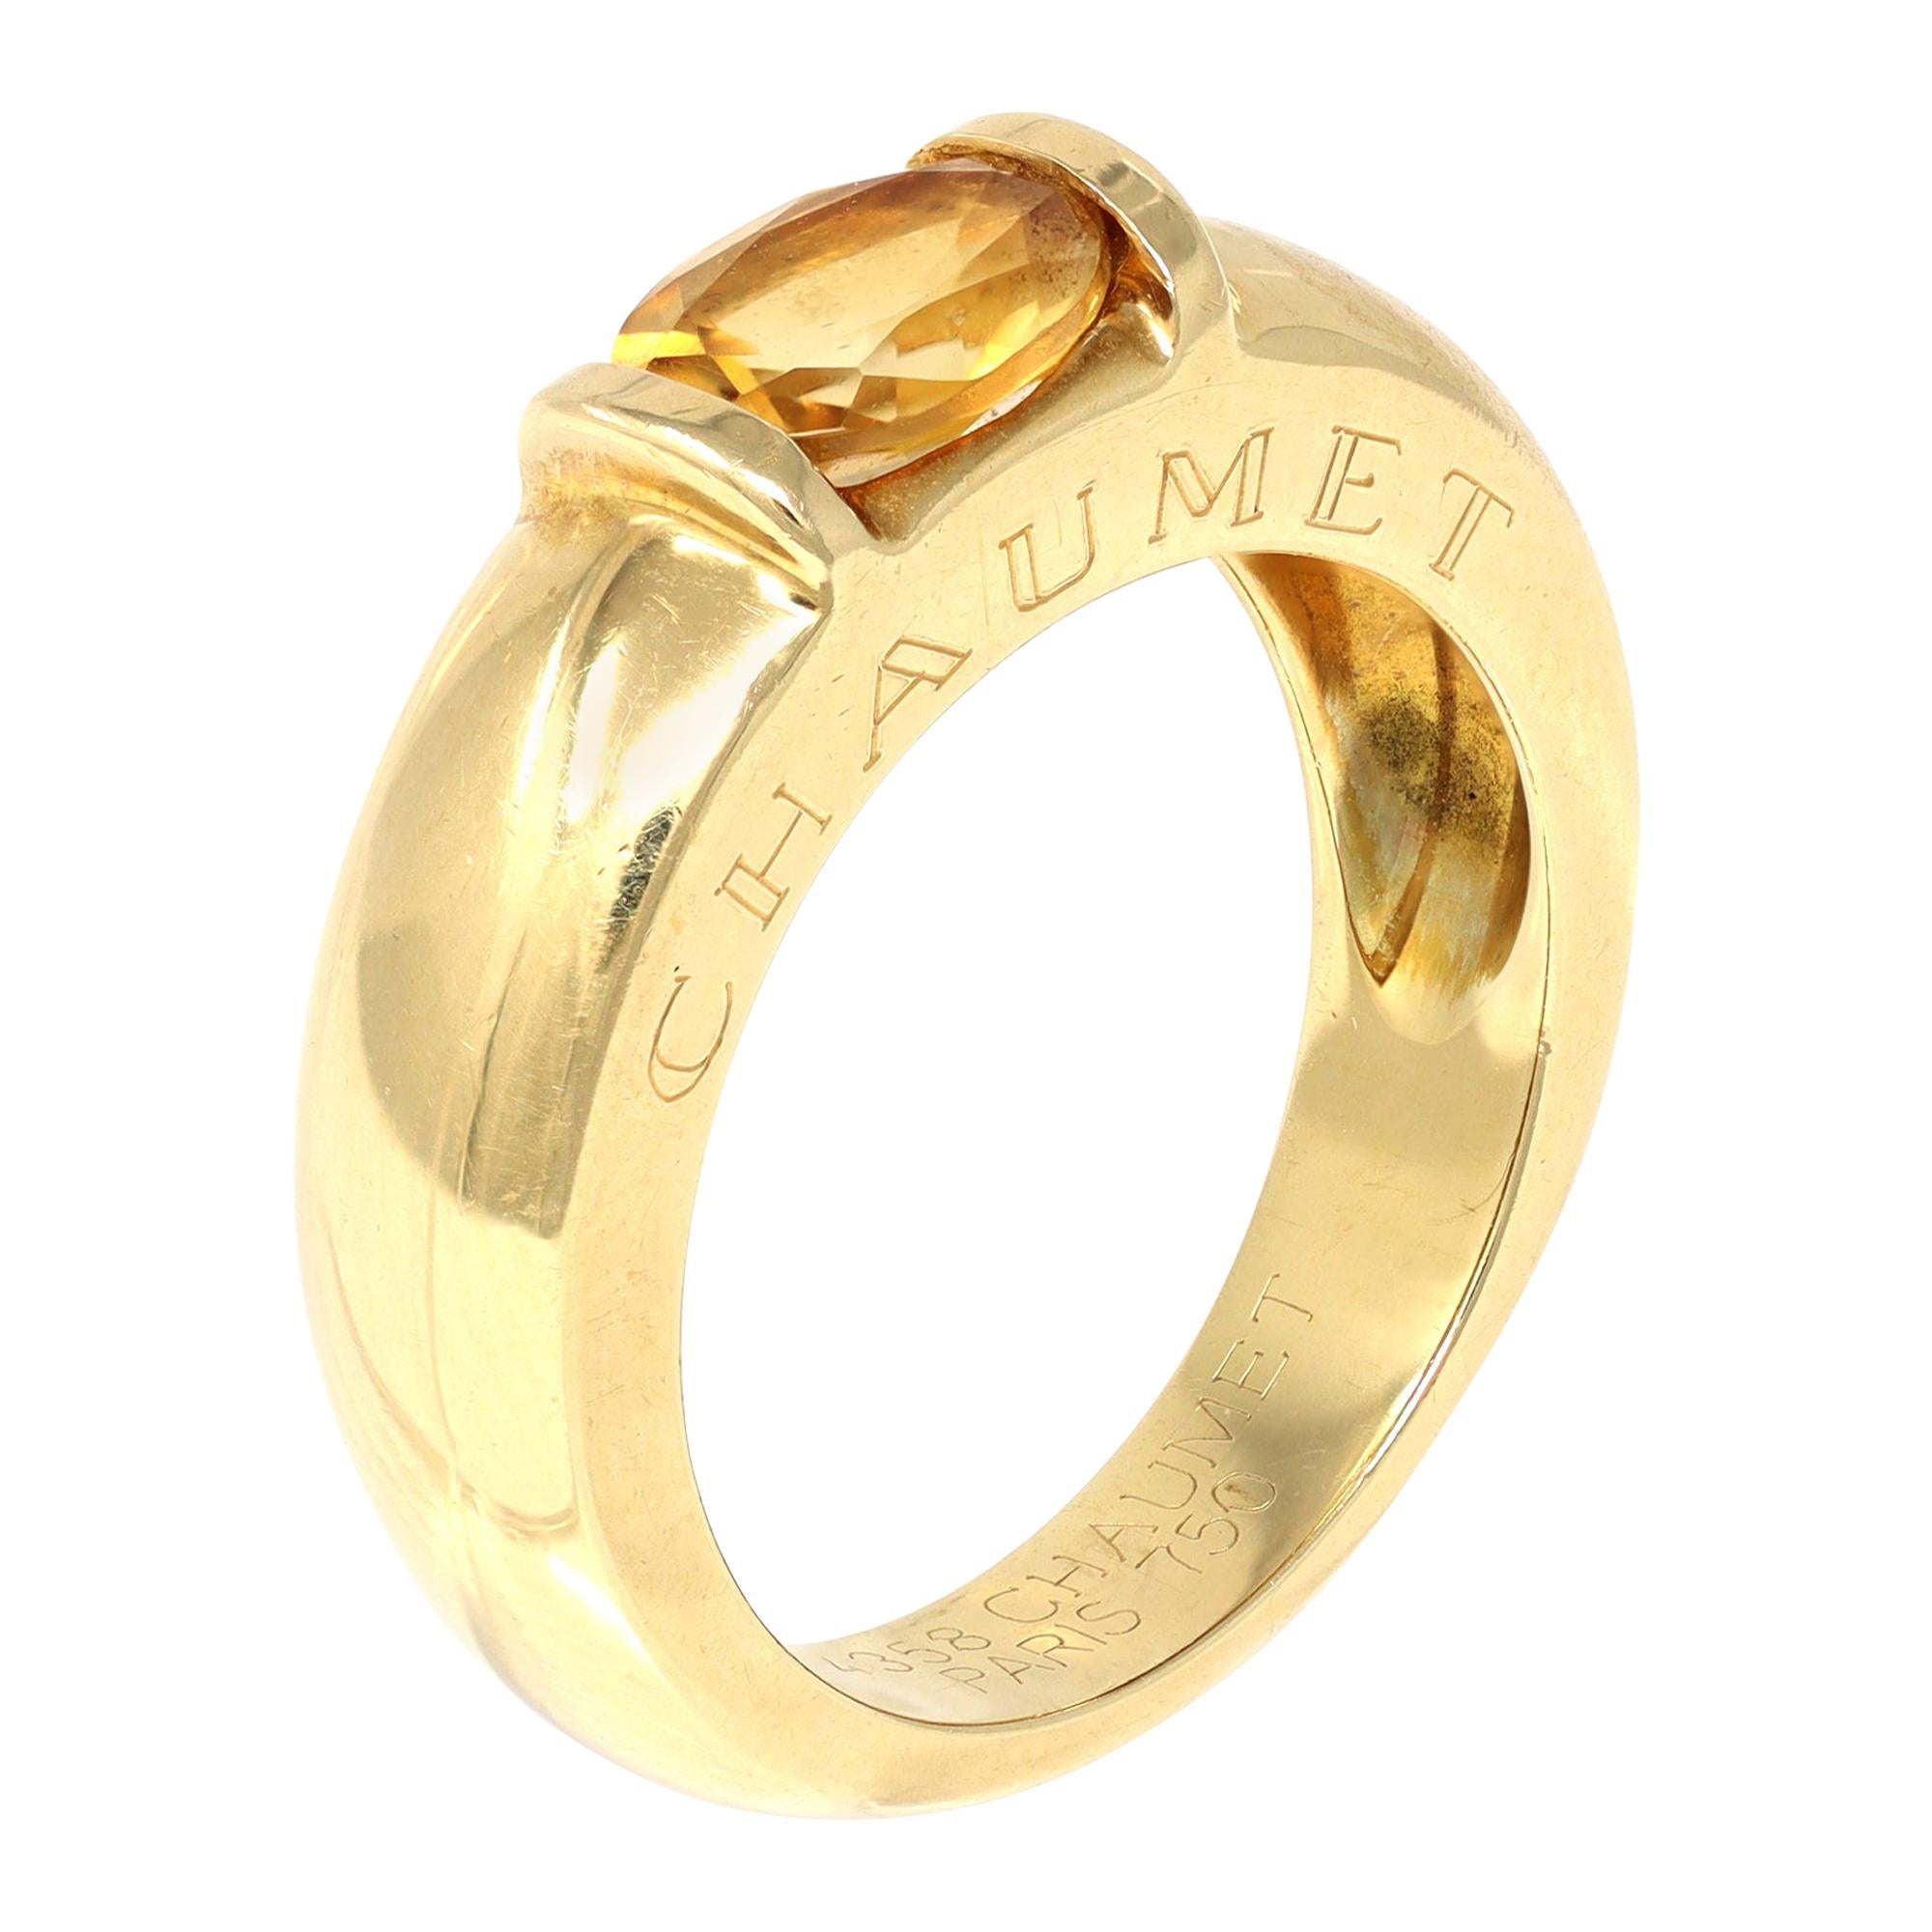 Signed Chaumet Paris Citrine Ring in 18k For Sale